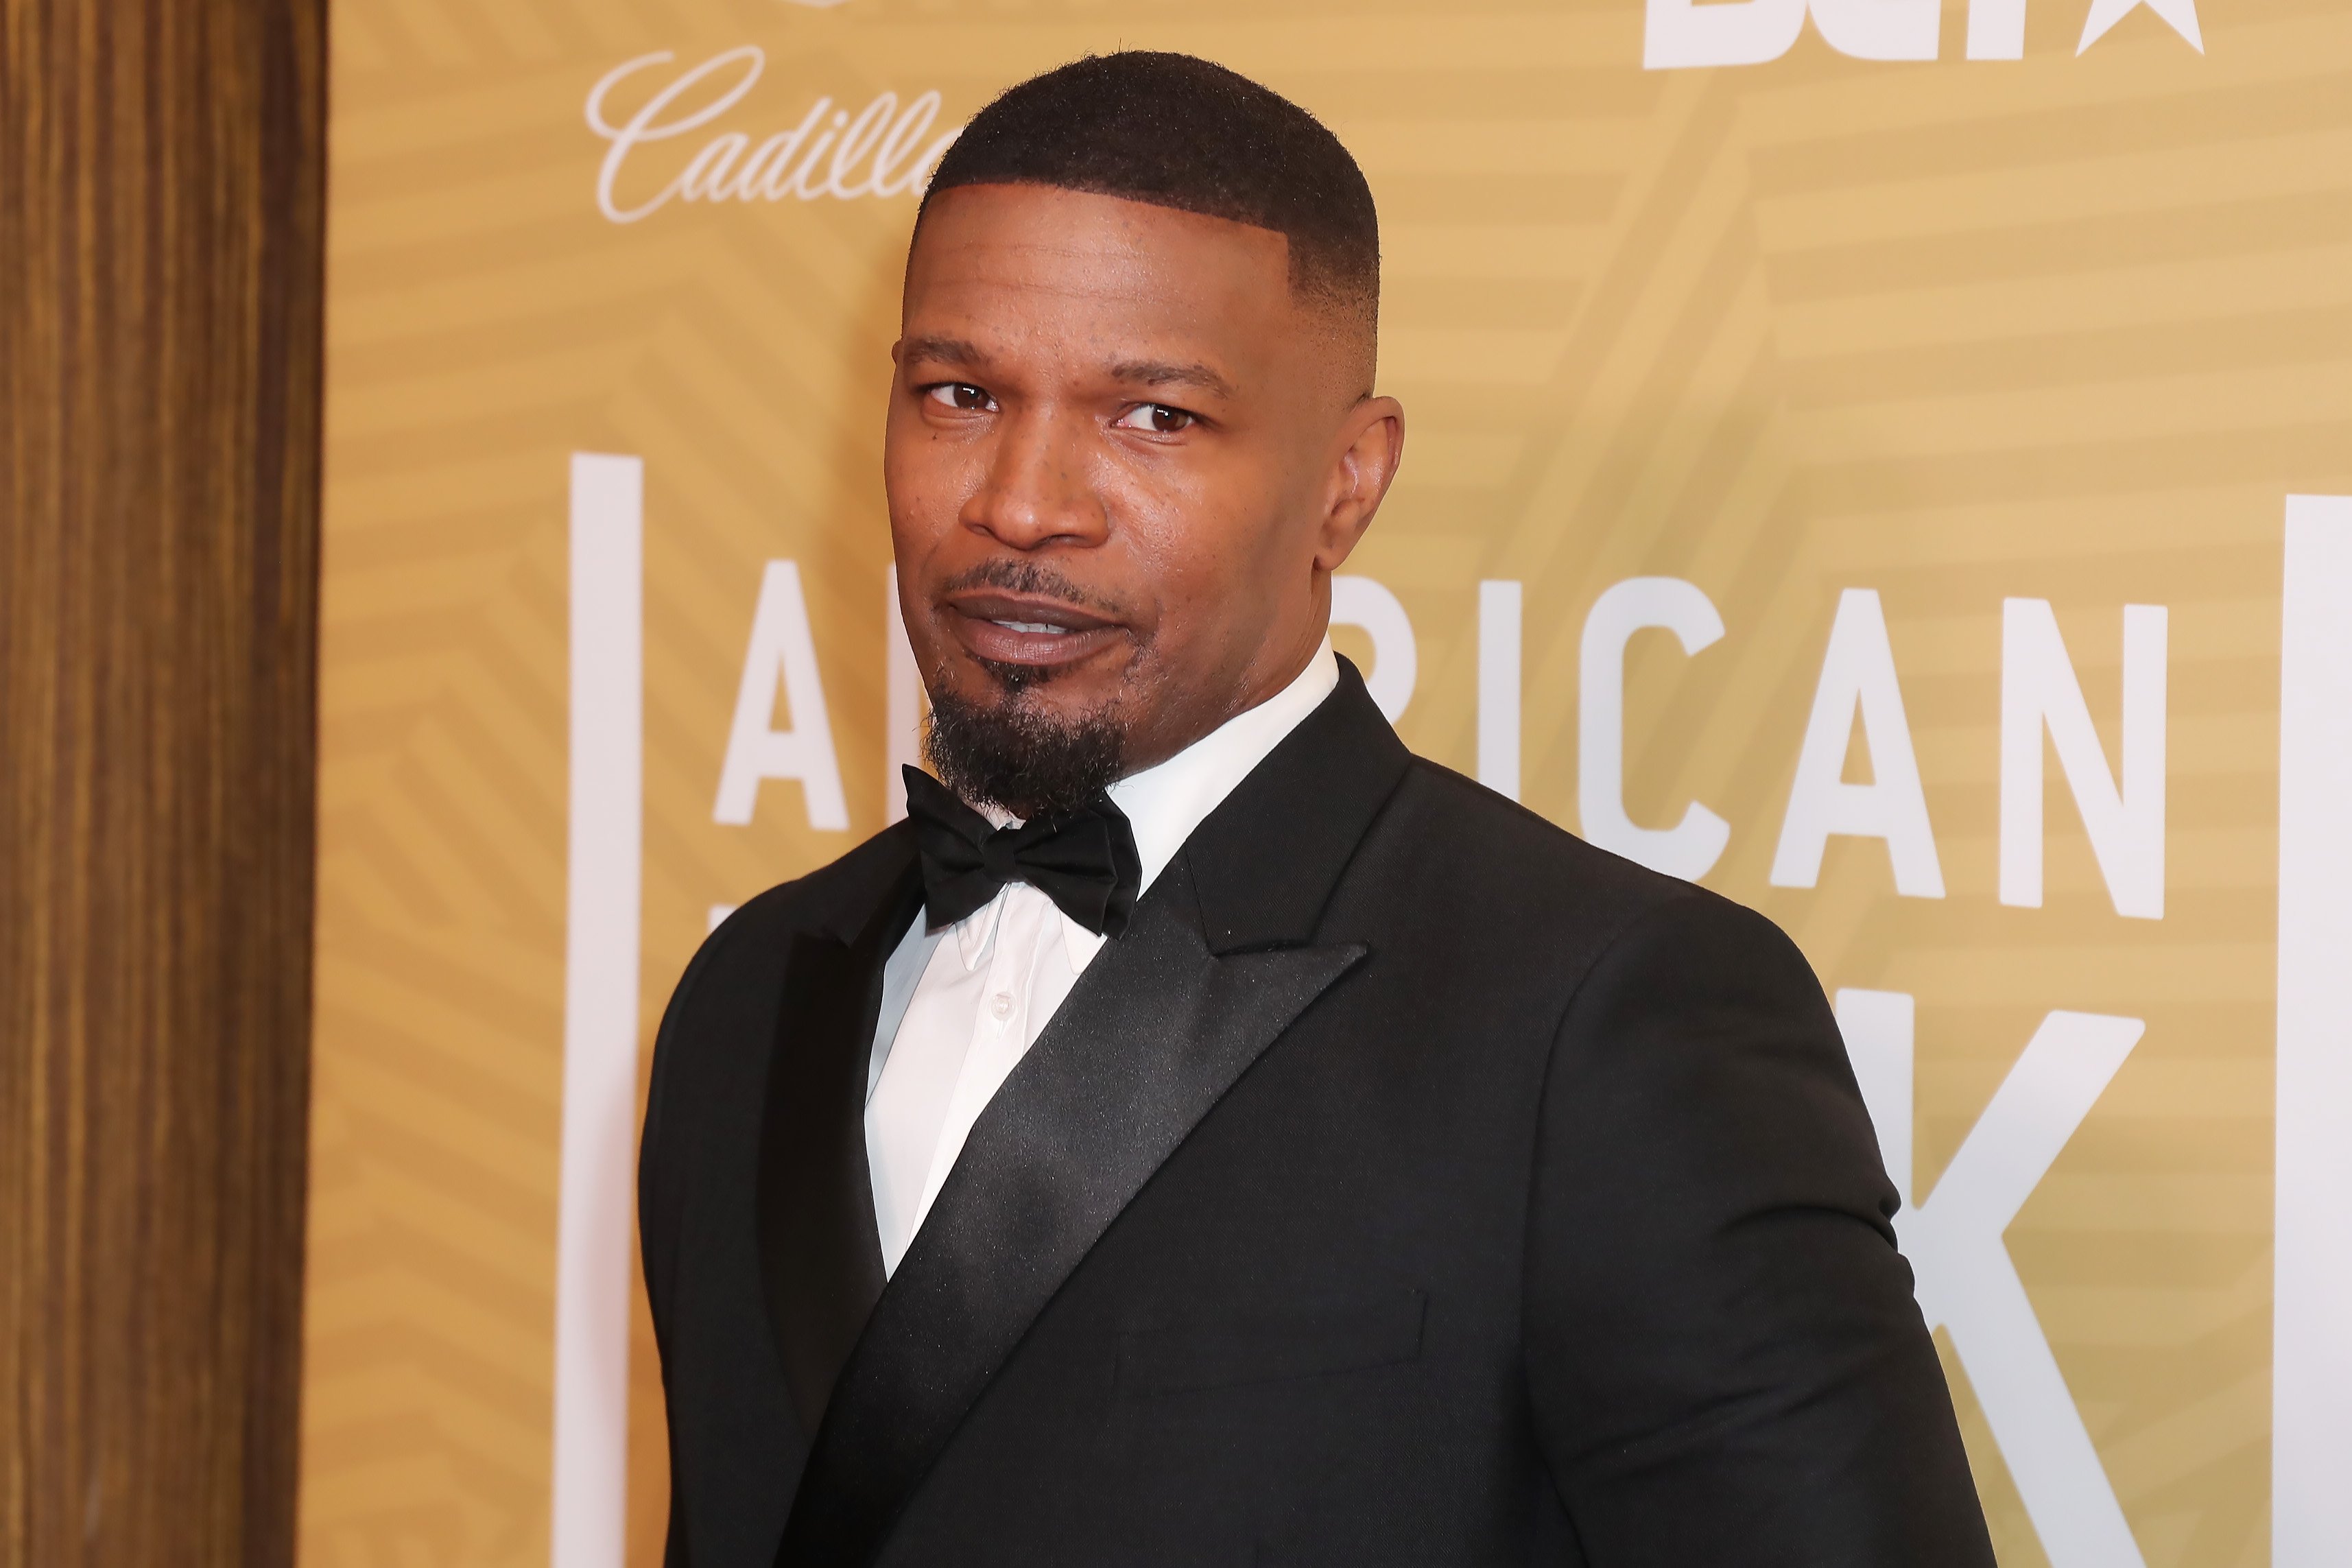 'Spider-Man: No Way Home' trailer star Jamie Foxx, who appears as Electro, wears a black suit over a white shirt and a black bow tie.